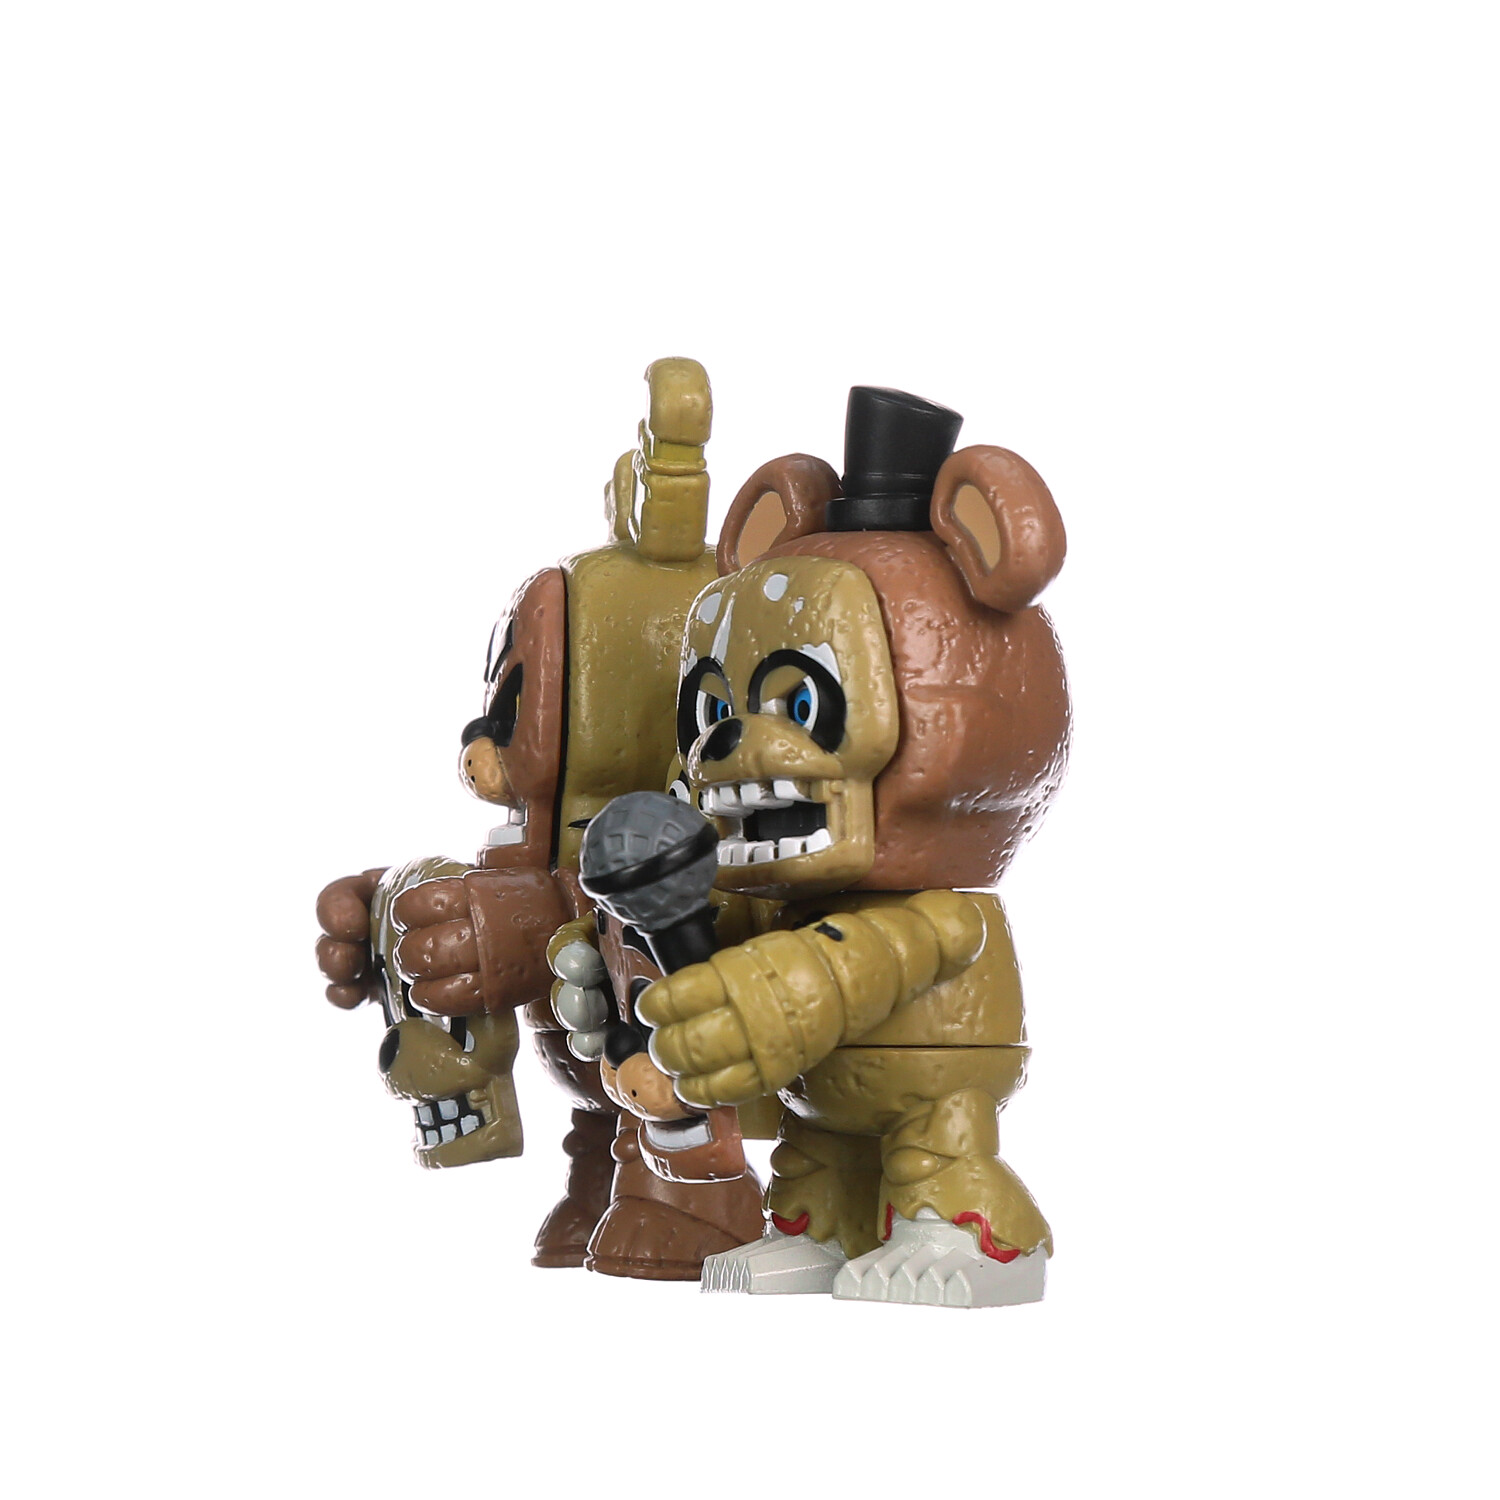 Buy SNAPS! Springtrap and Freddy 2-Pack at Funko.